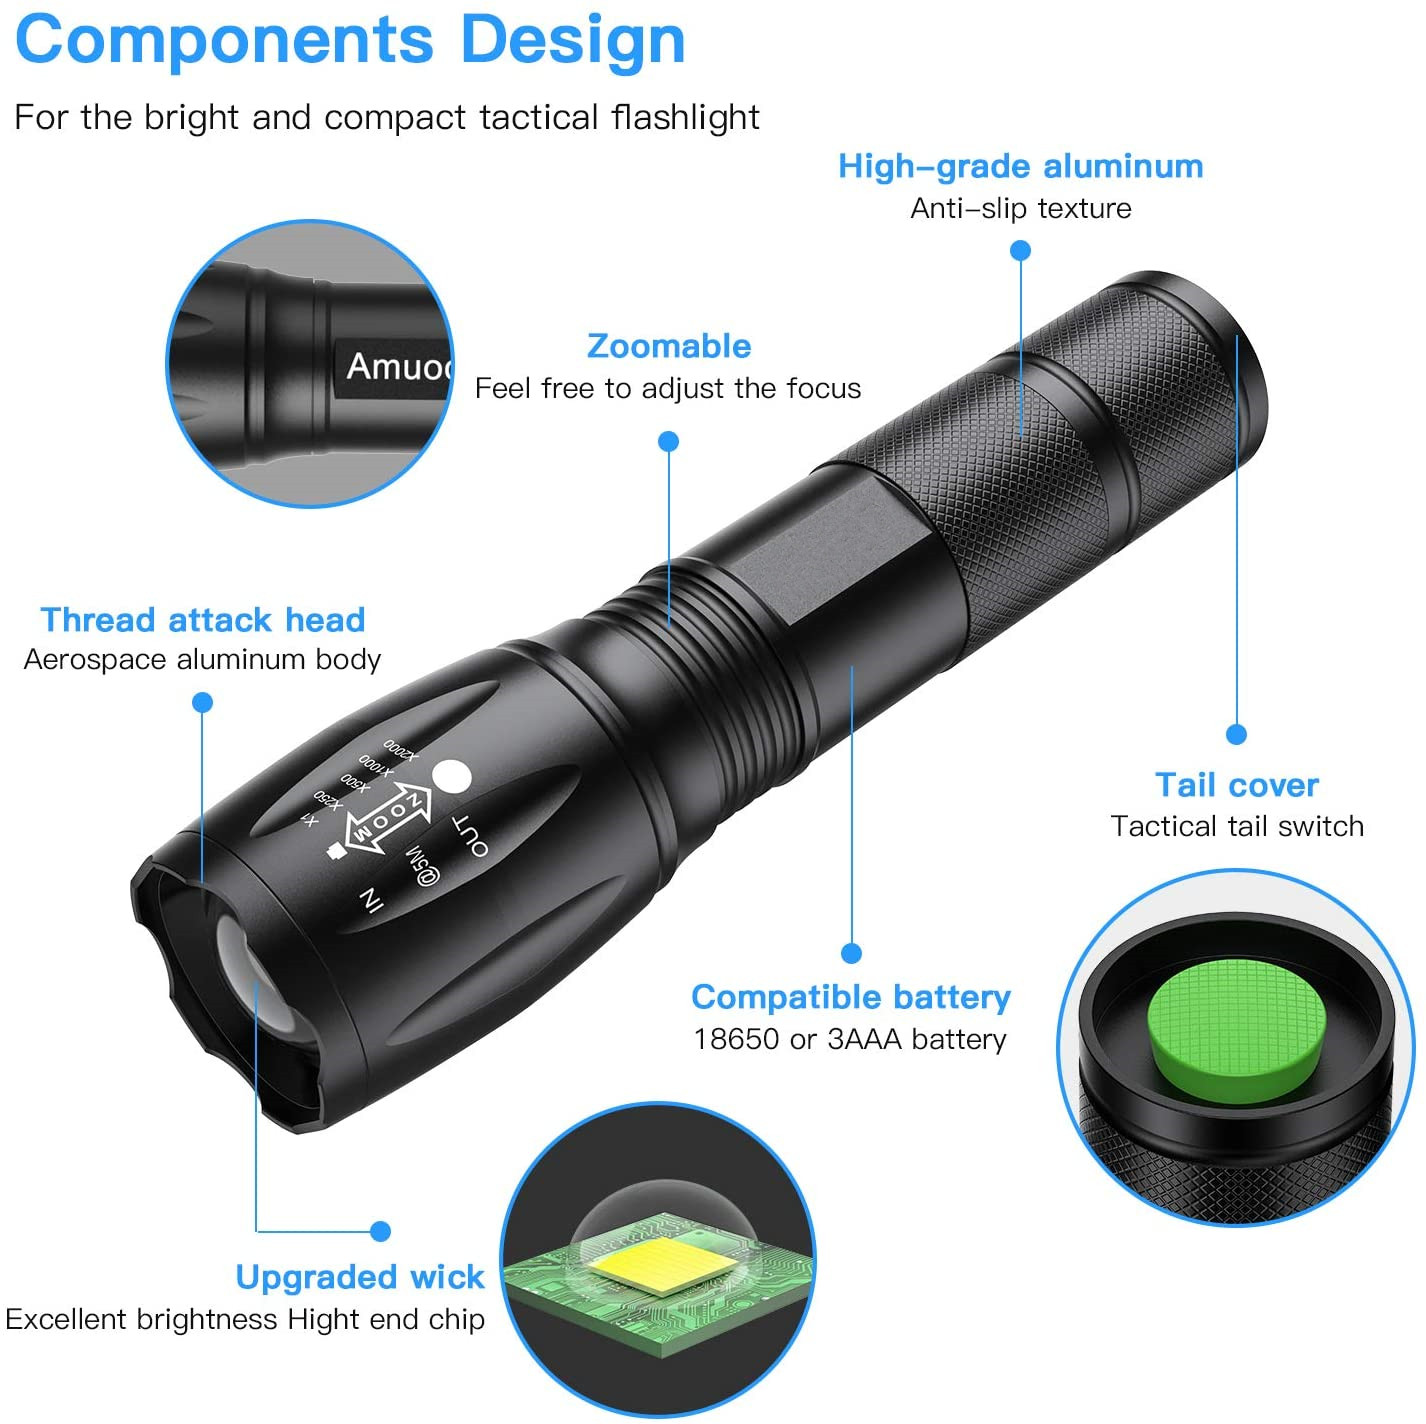 LED Tactical Flashlight, Super Bright High Lumen XML T6 LED Flashlights Portable Outdoor Water Resistant Torch Light Zoomable Flashlight with 5 Light Modes, 2 Pack - image 2 of 7